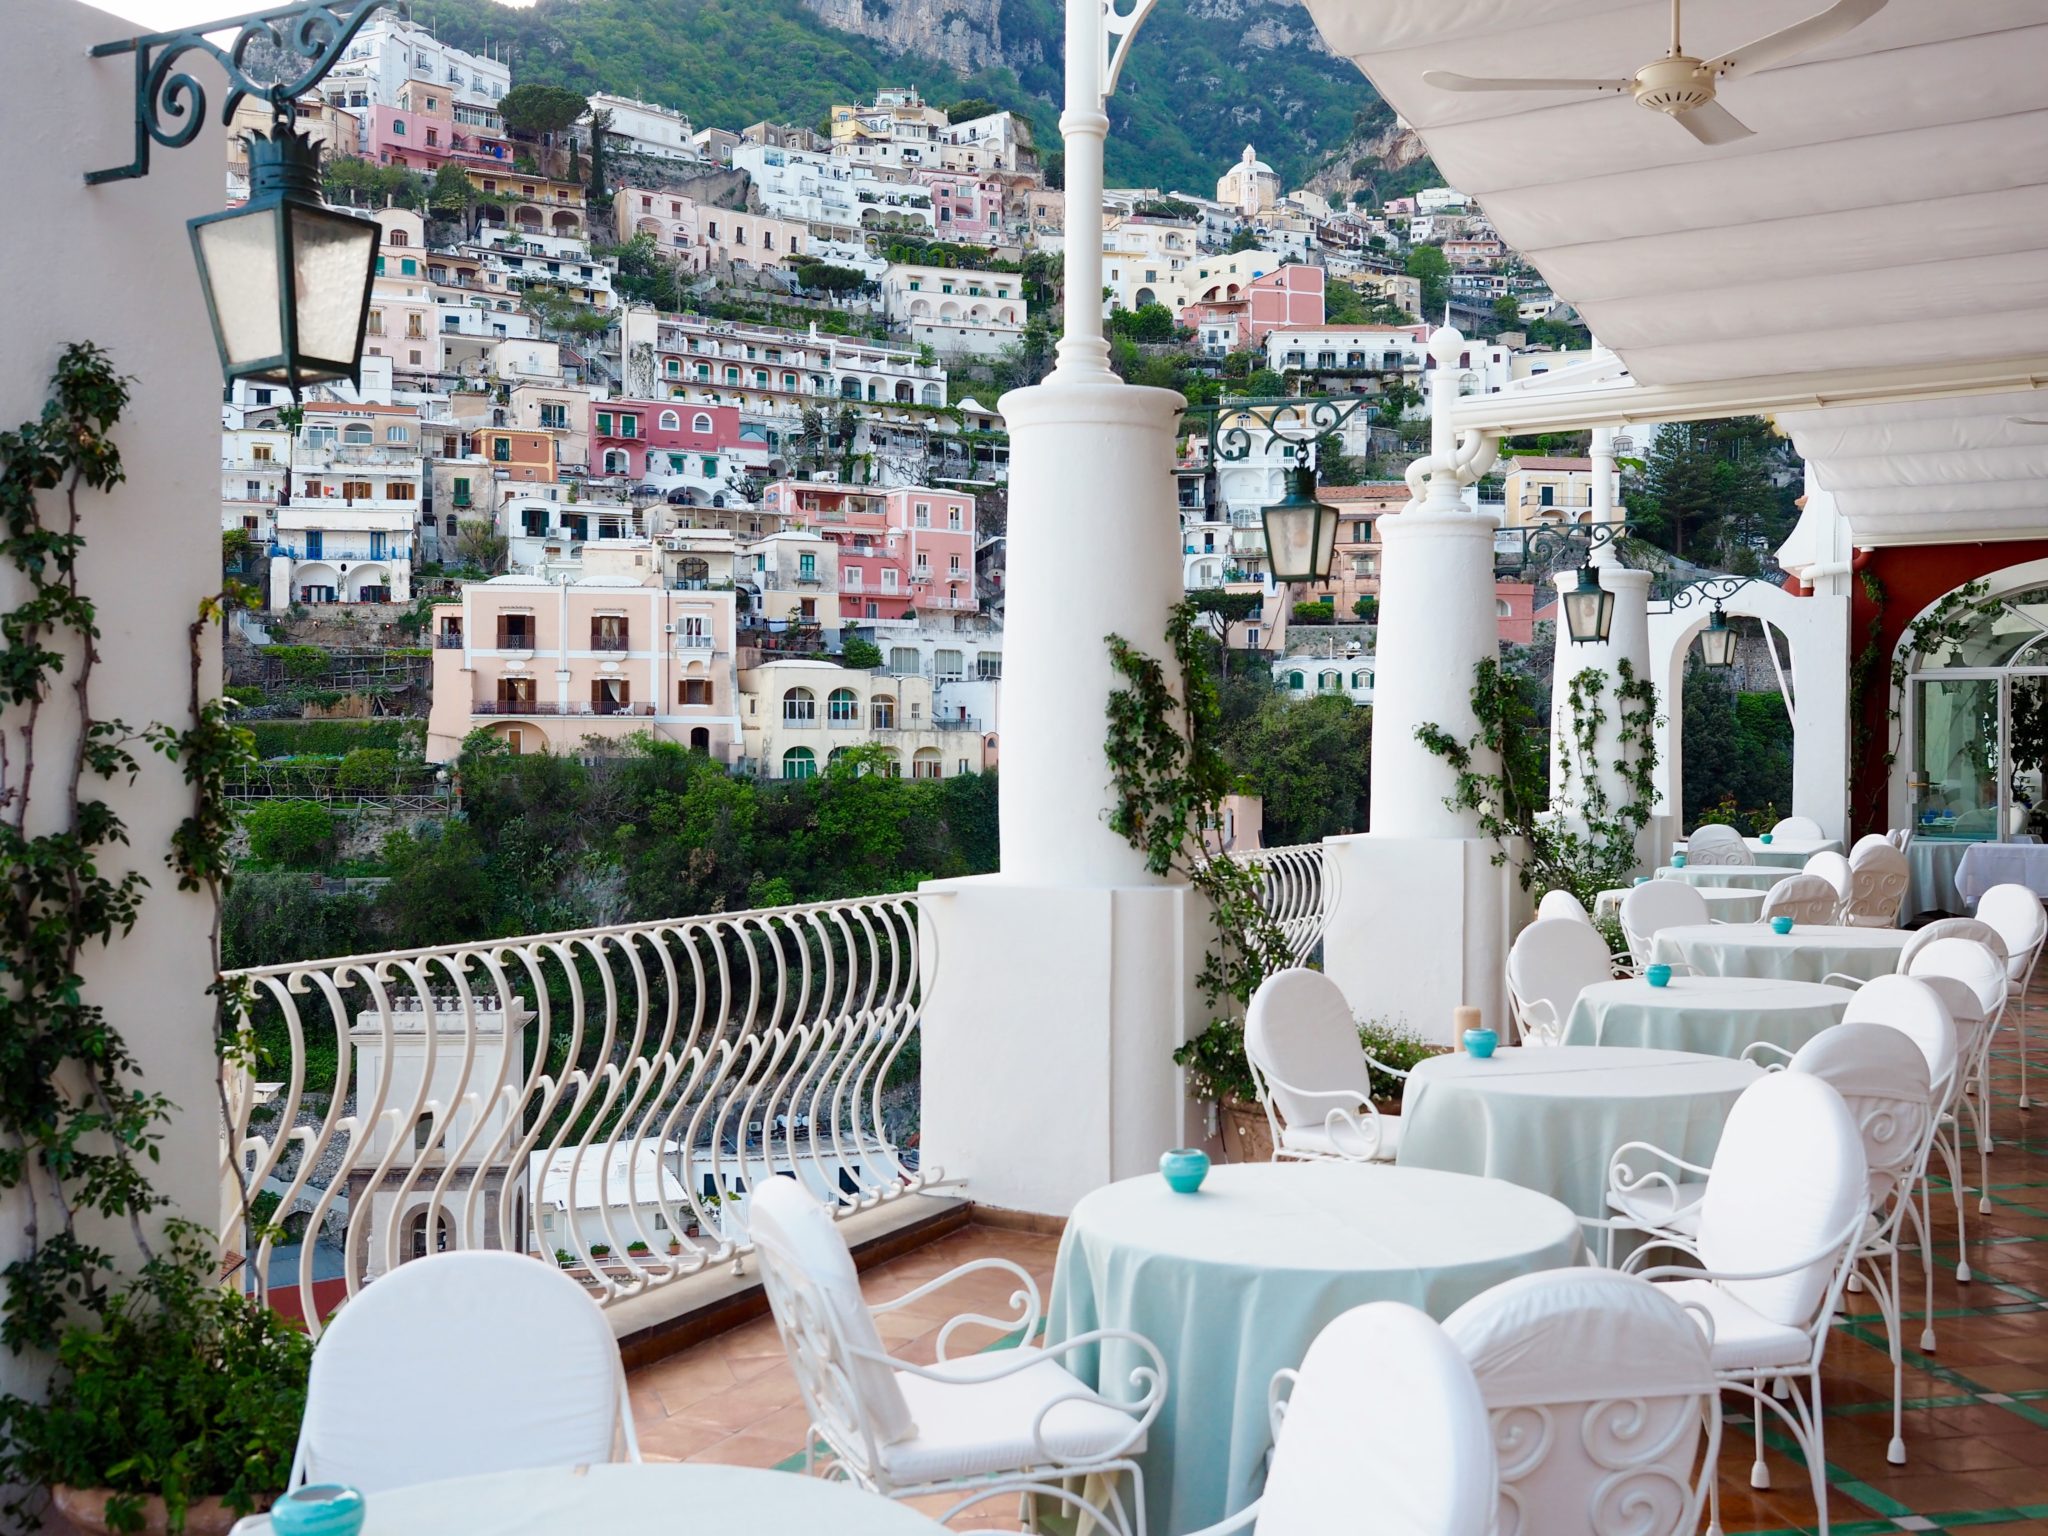 A Complete Guide to Positano - World of Wanderlust